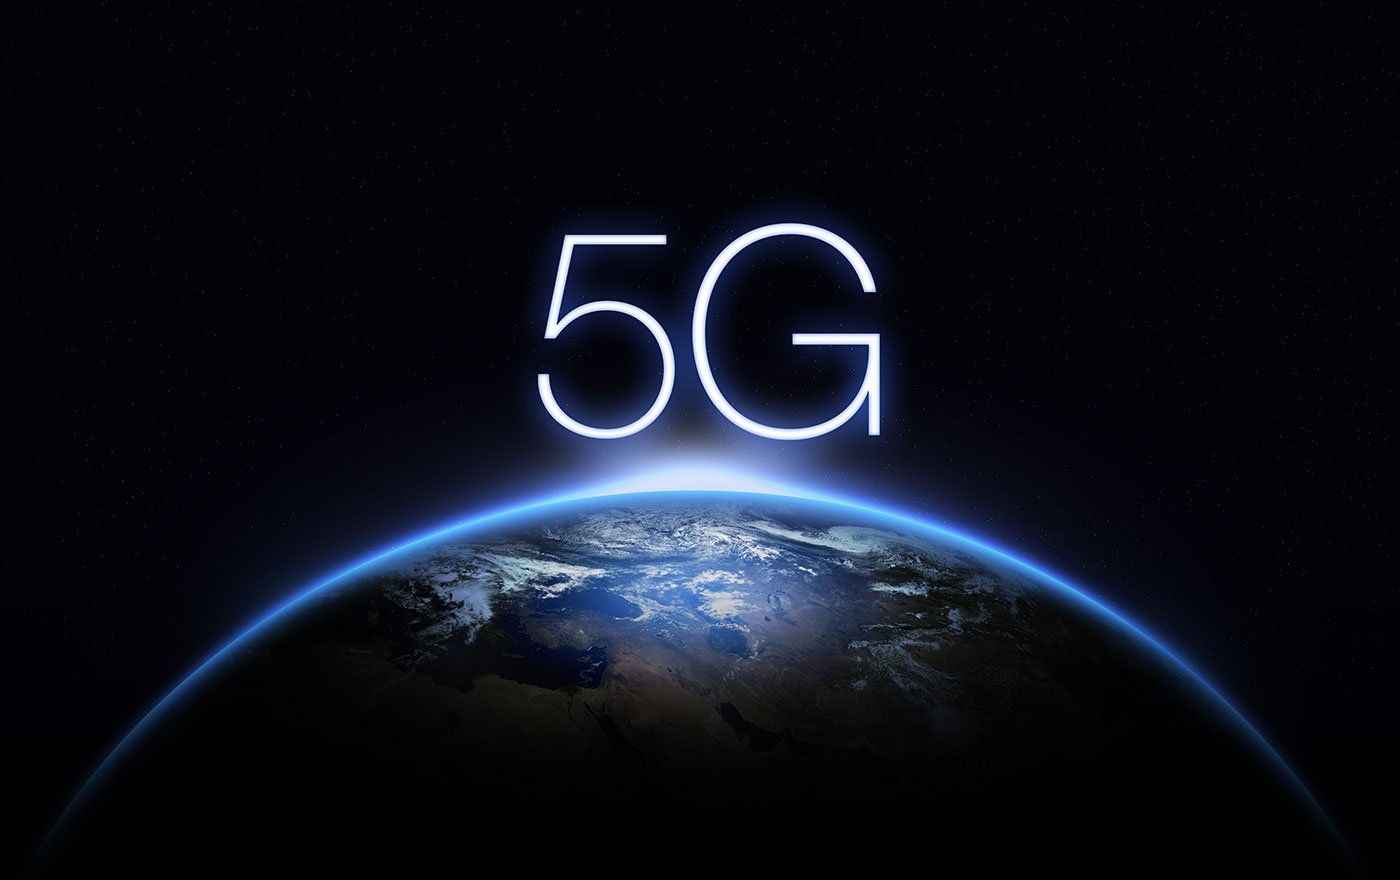 AT&T, Dish, and T-Mobile spend billions on more 5G spectrum in near future